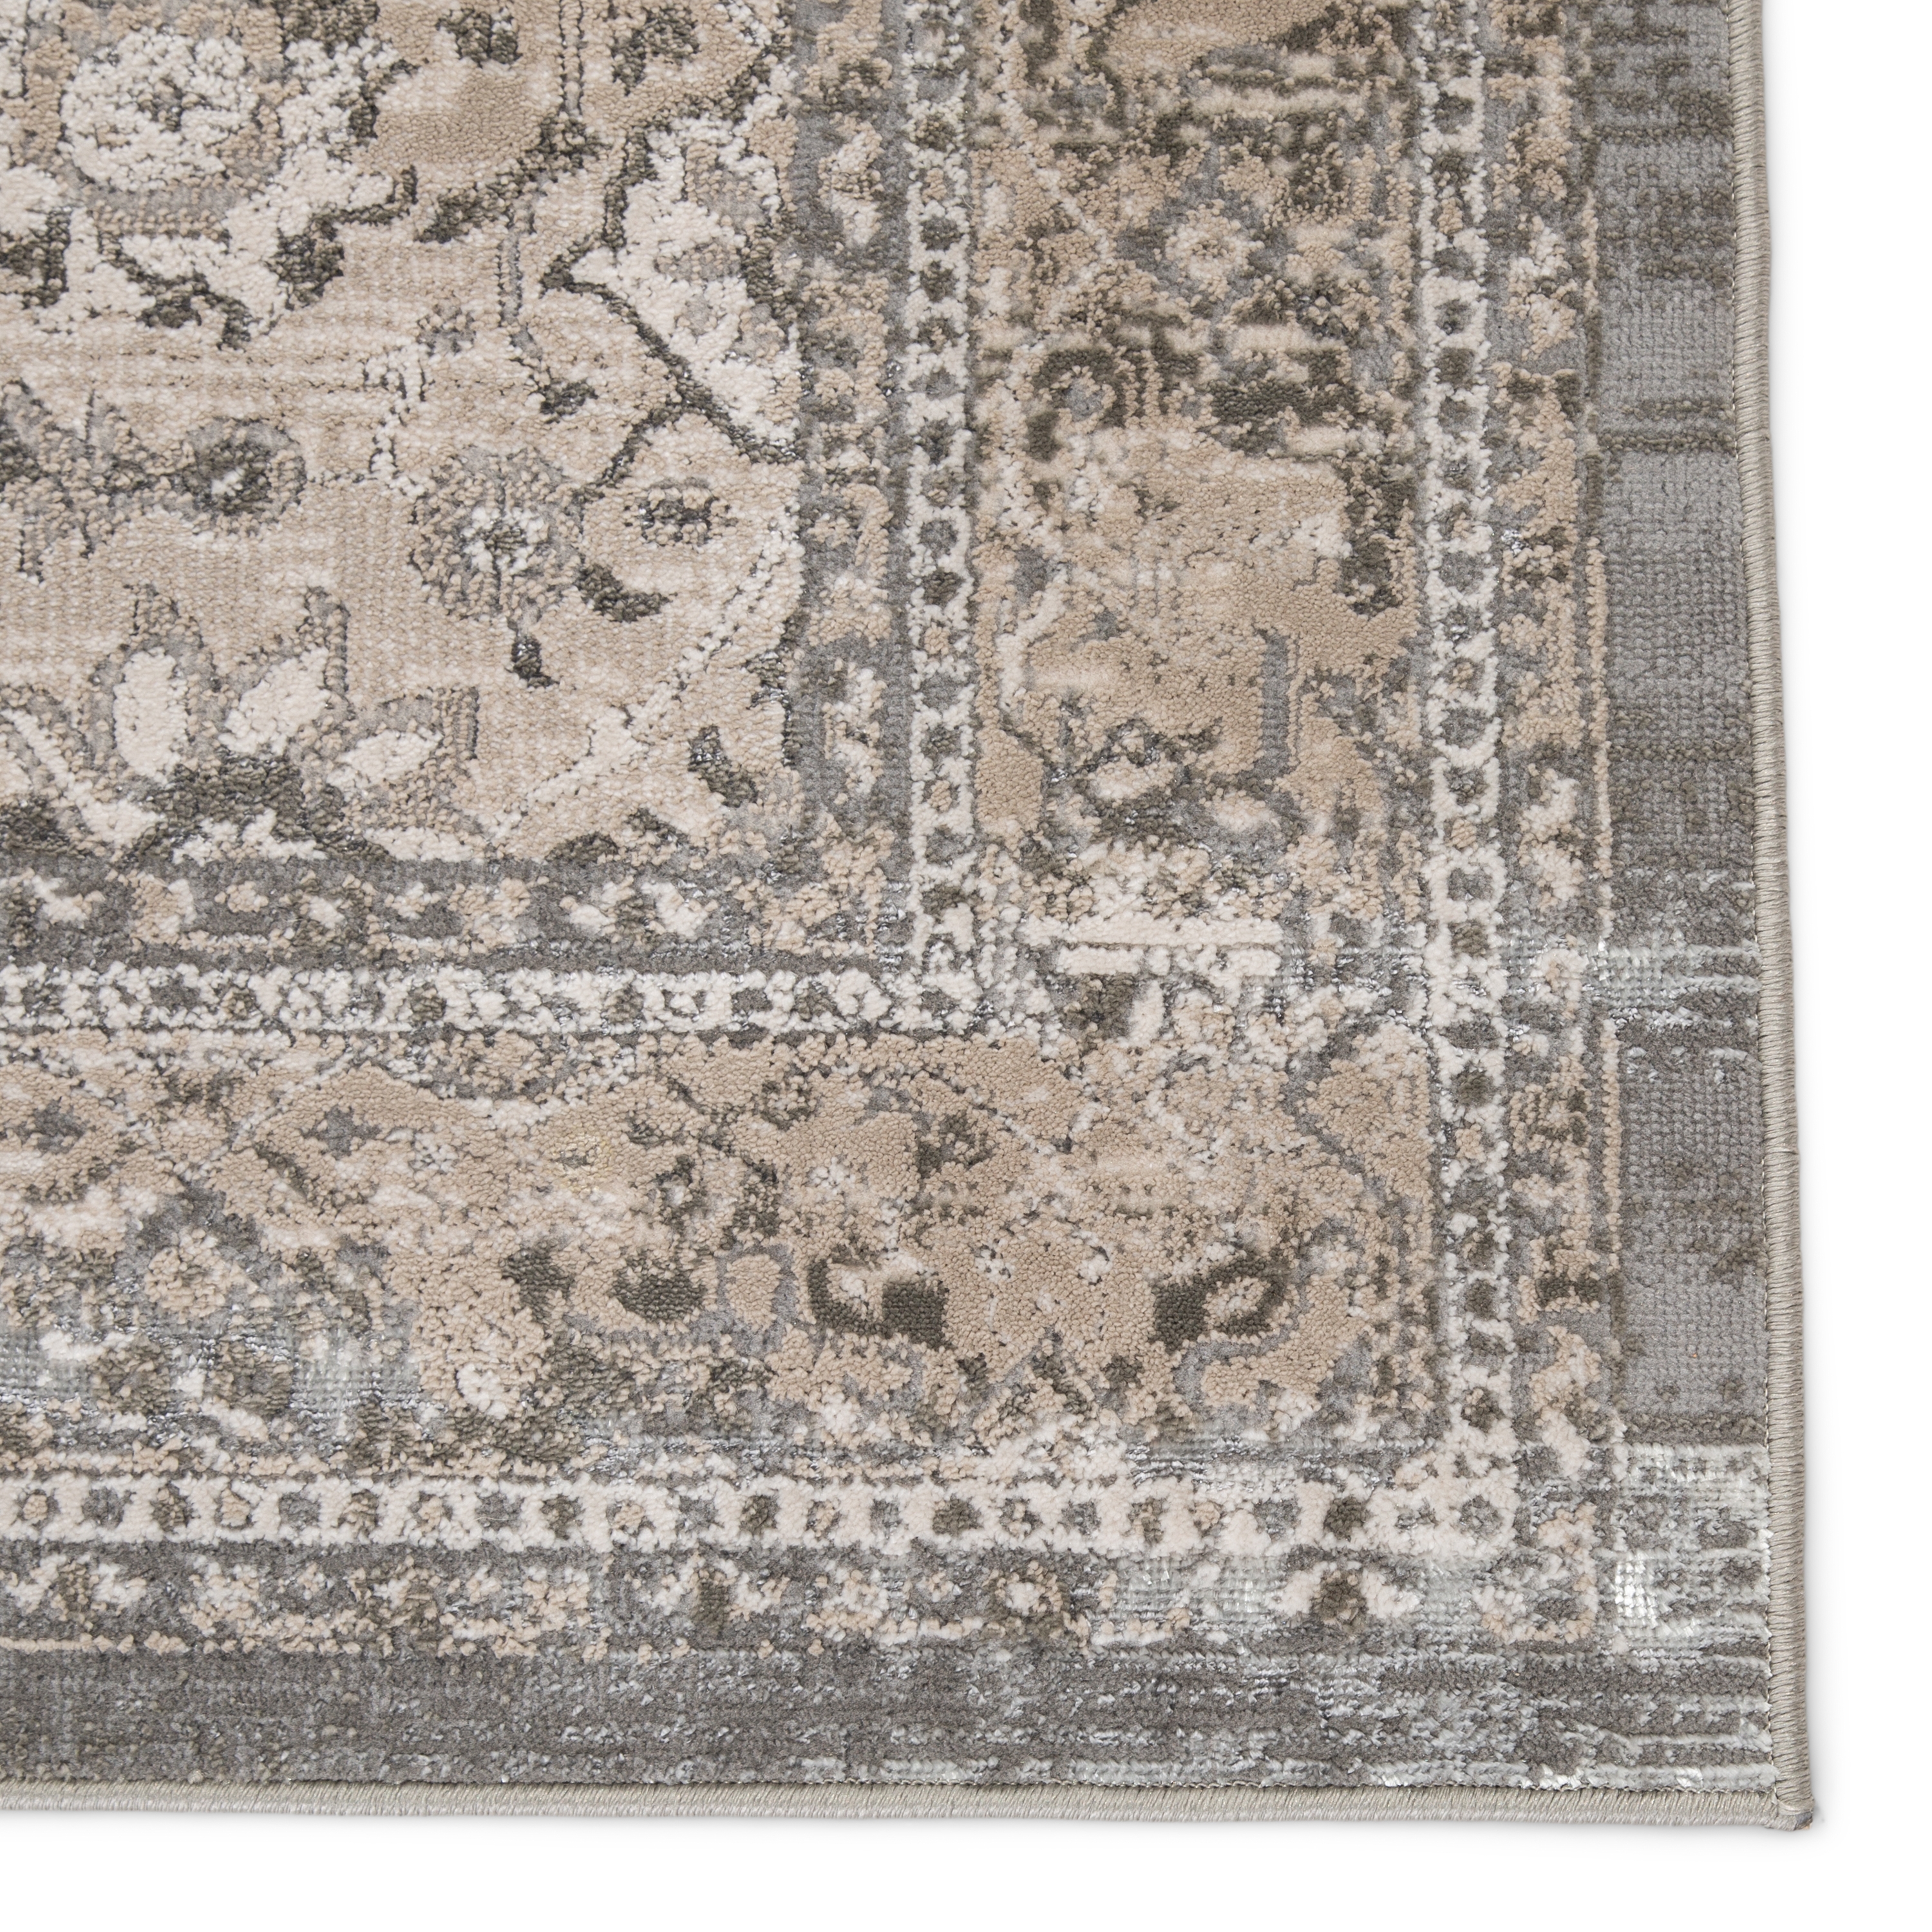 Vibe by Odel Oriental Gray/ White Area Rug (7'10"X10'6") - Image 3